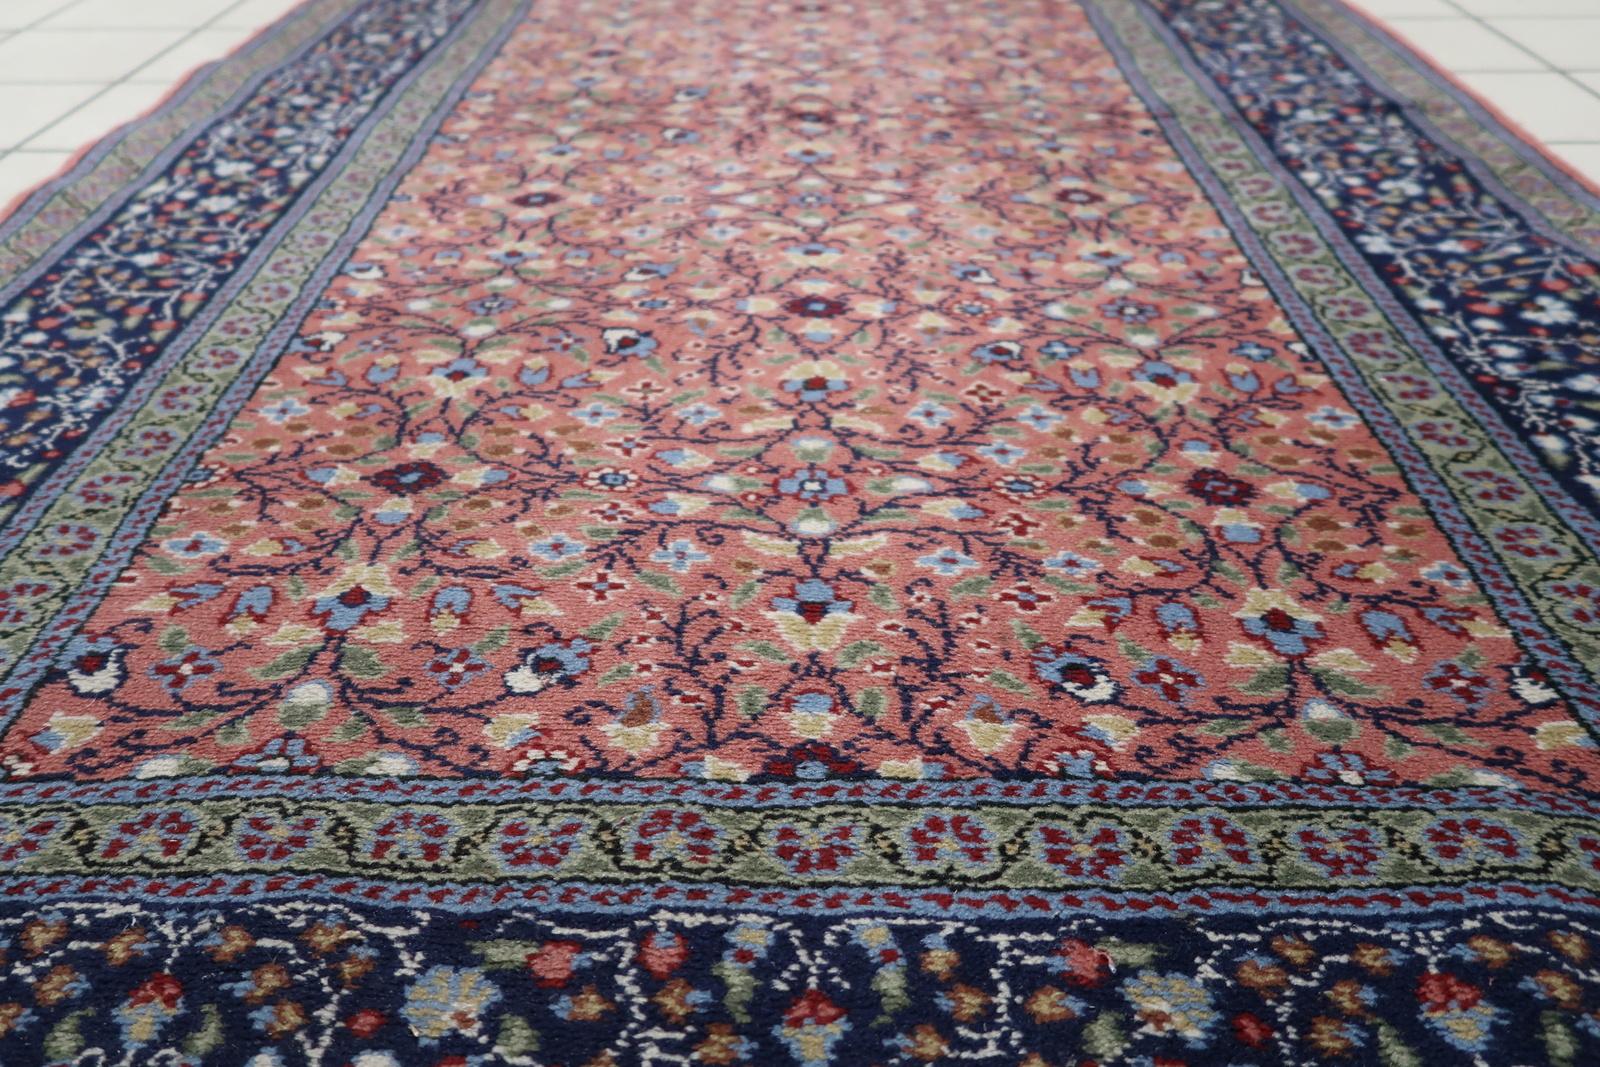 Charming Vintage Indian Agra Rug from the 1960s - 1C1081 For Sale 4